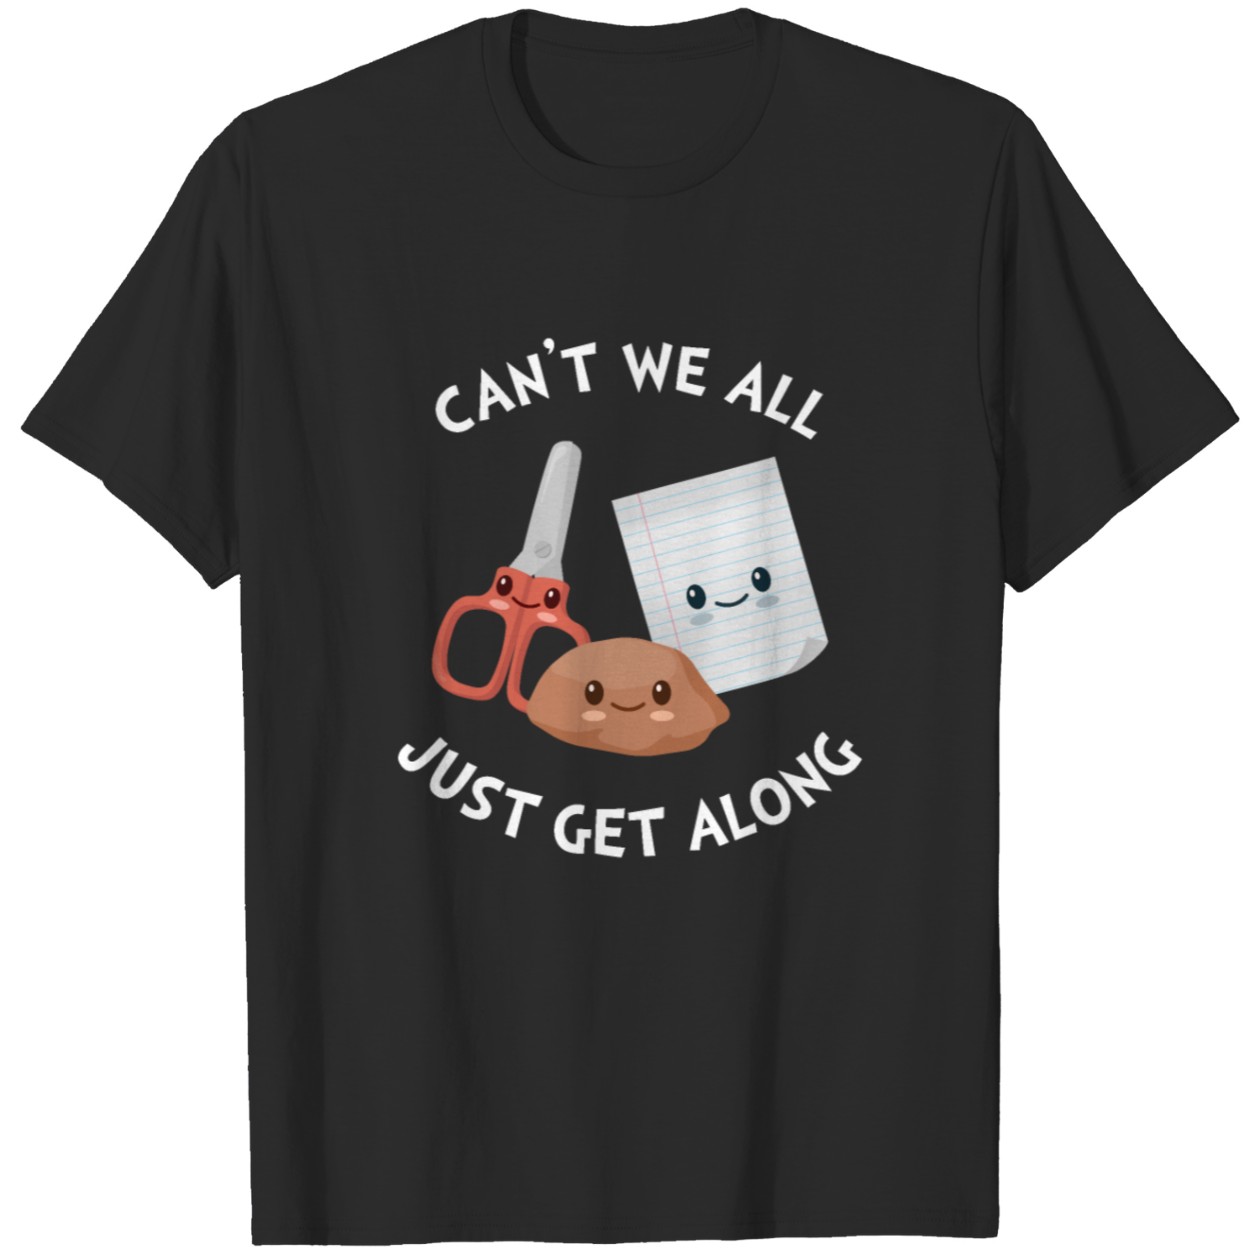 Rock Paper Scissors Funny Can’t We Just Get Along Graphic Tee DZT